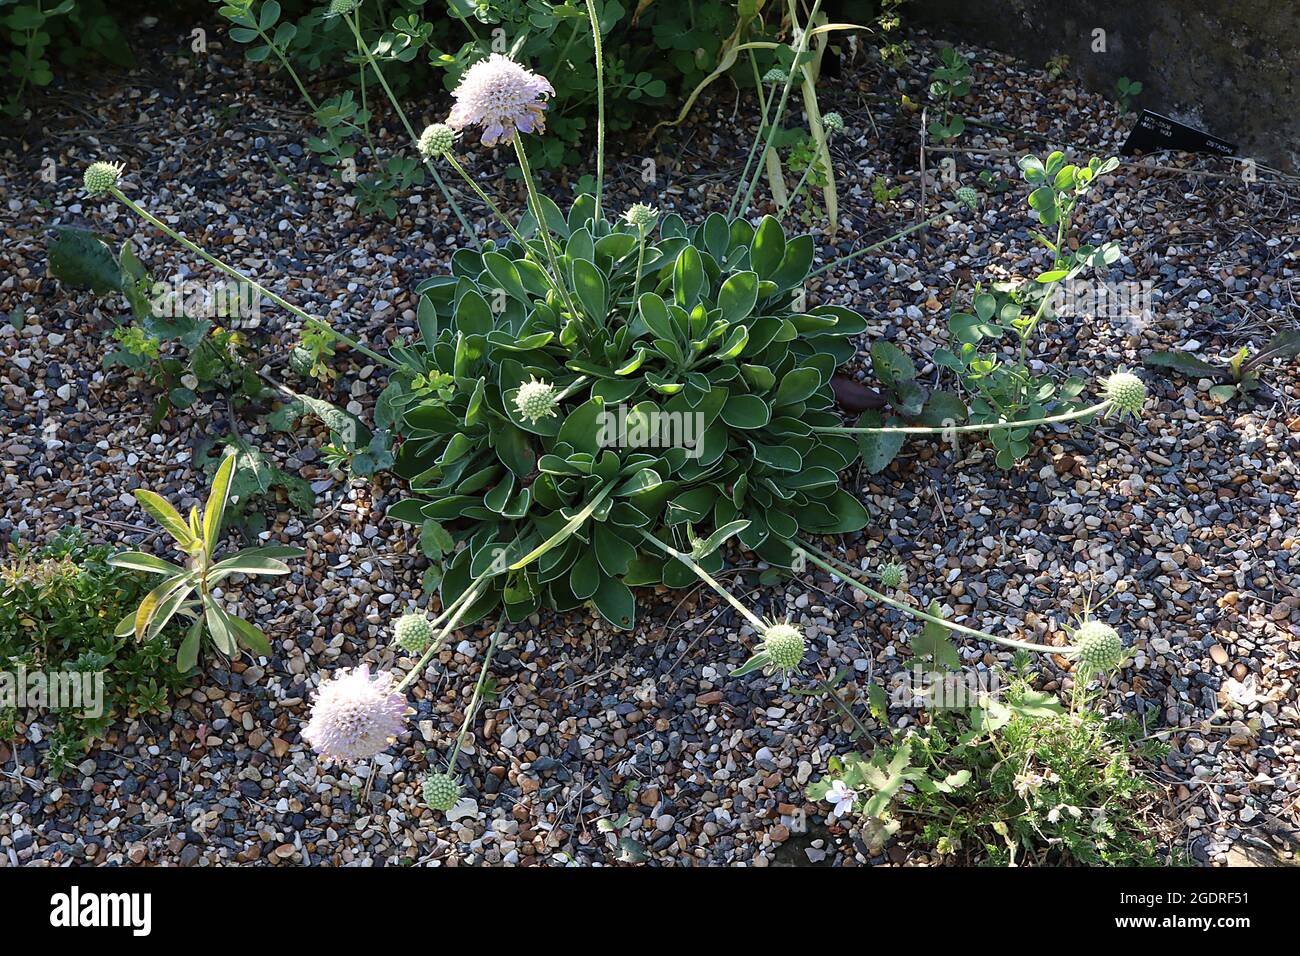 Scabiosa albocincta white outlined scabious – lilac pincushion flowers with very long stems and basal mid green leaves with white outline,  July, UK Stock Photo